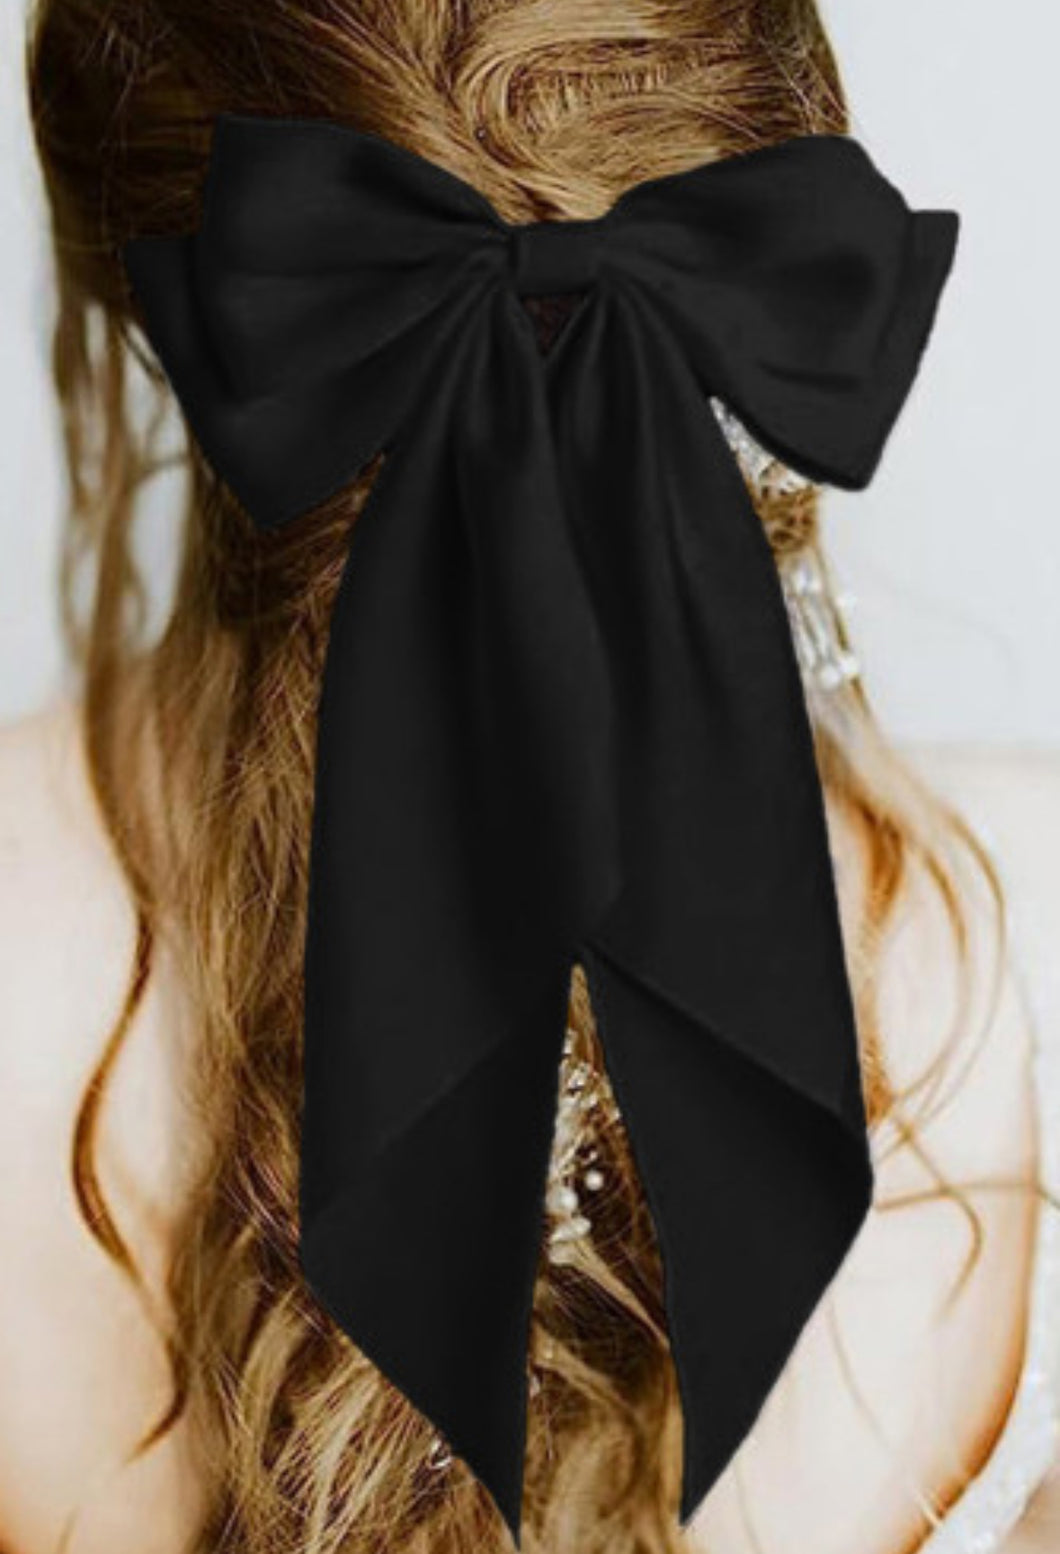 Blk Oversized Bowknot Satin Hair Clip~ 3 pack